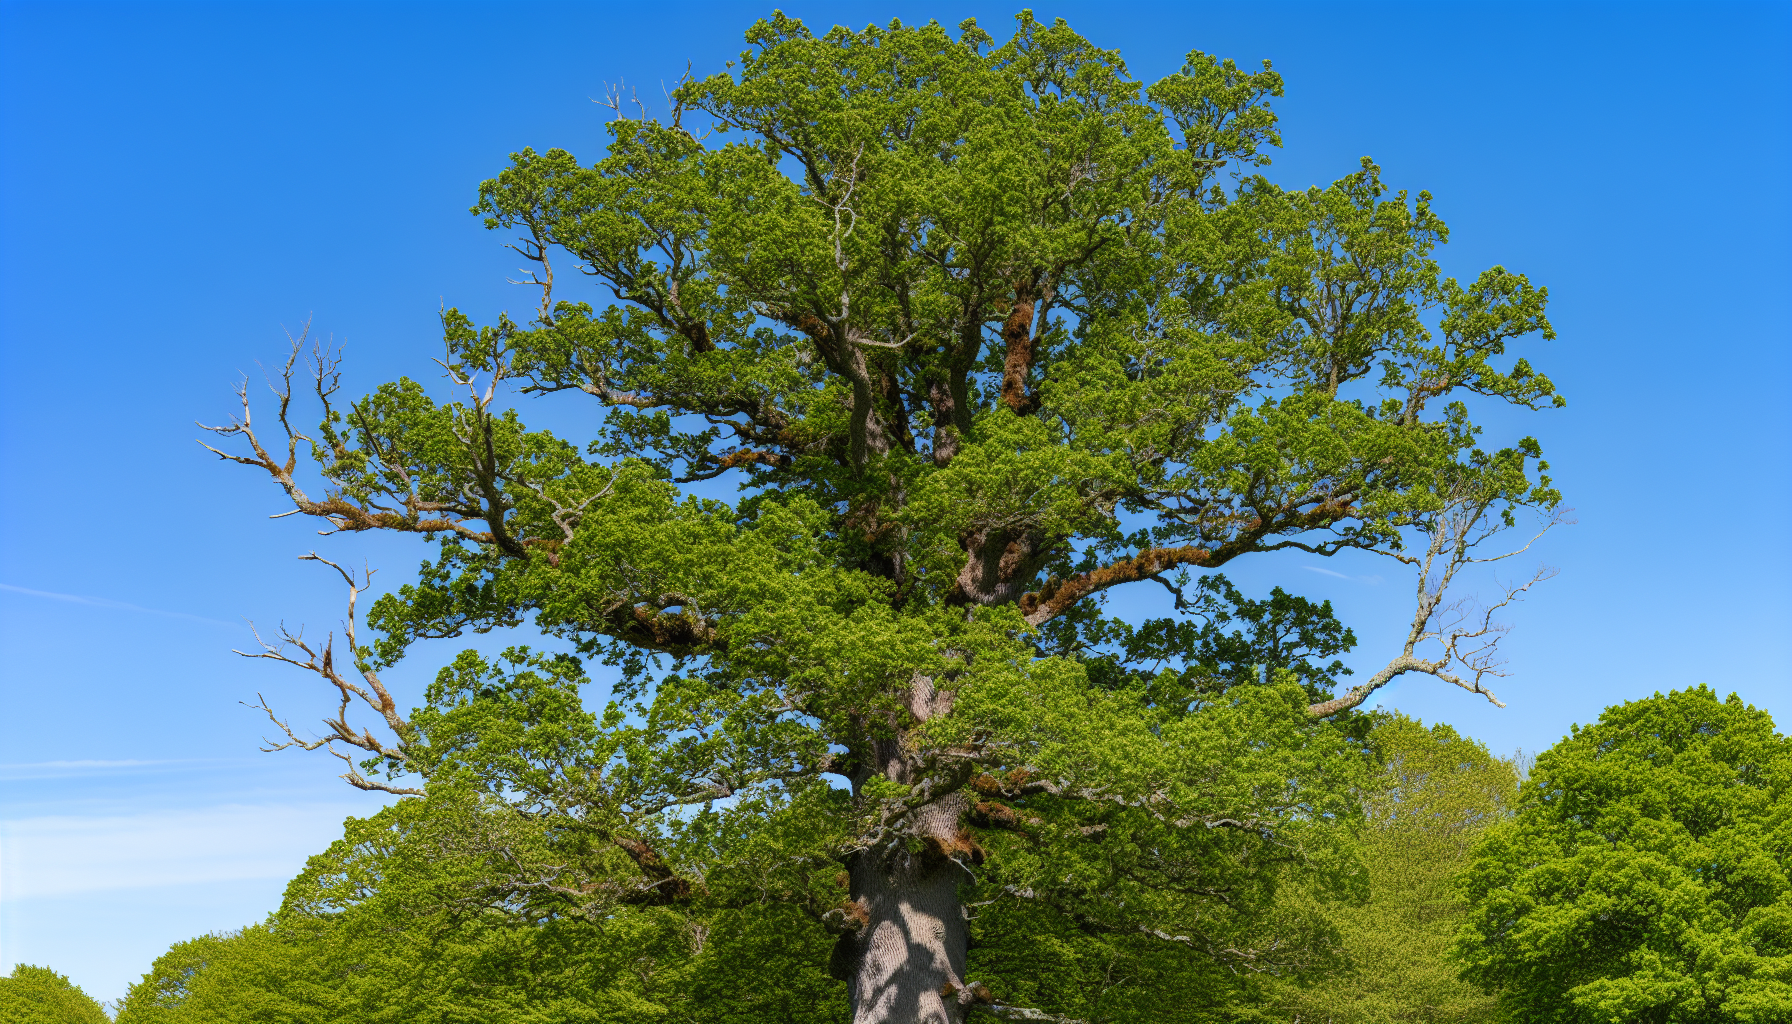 A healthy tree with vibrant green leaves and no dead branches